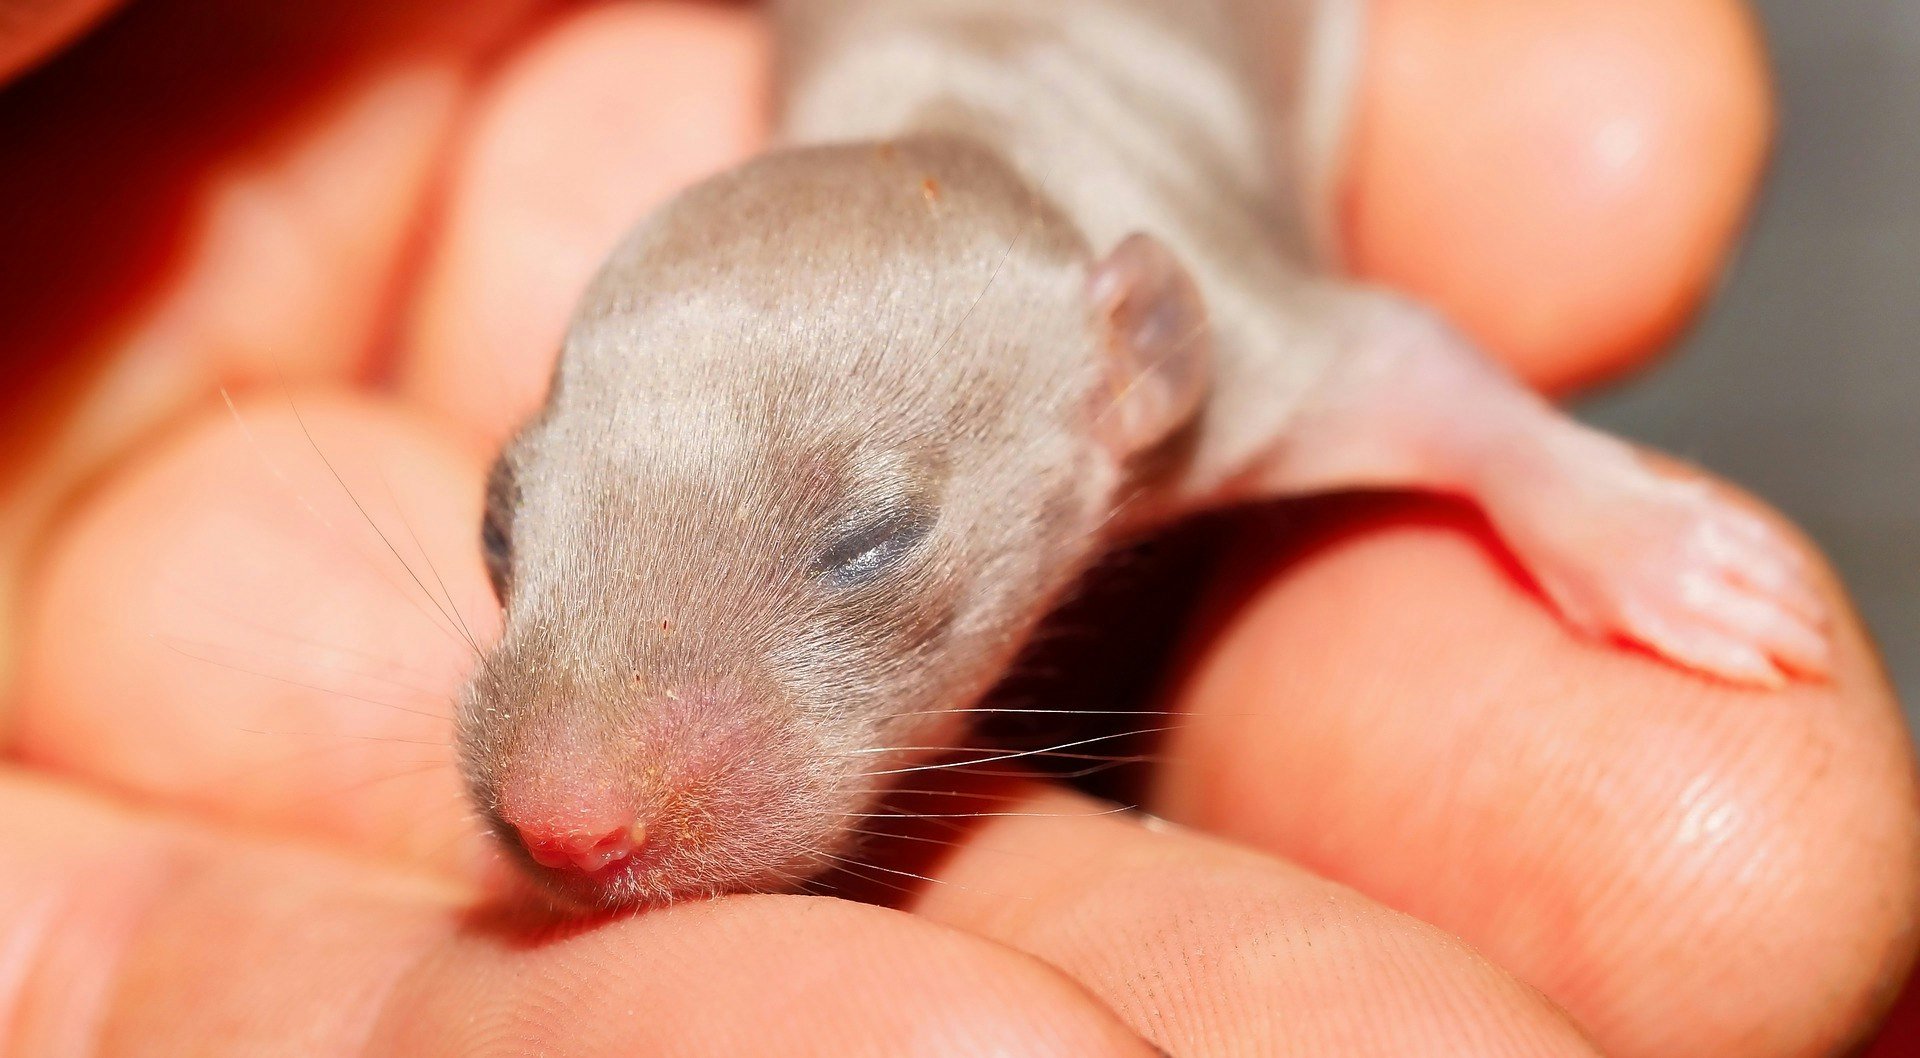 a baby rat with closed eyes in a person's hand